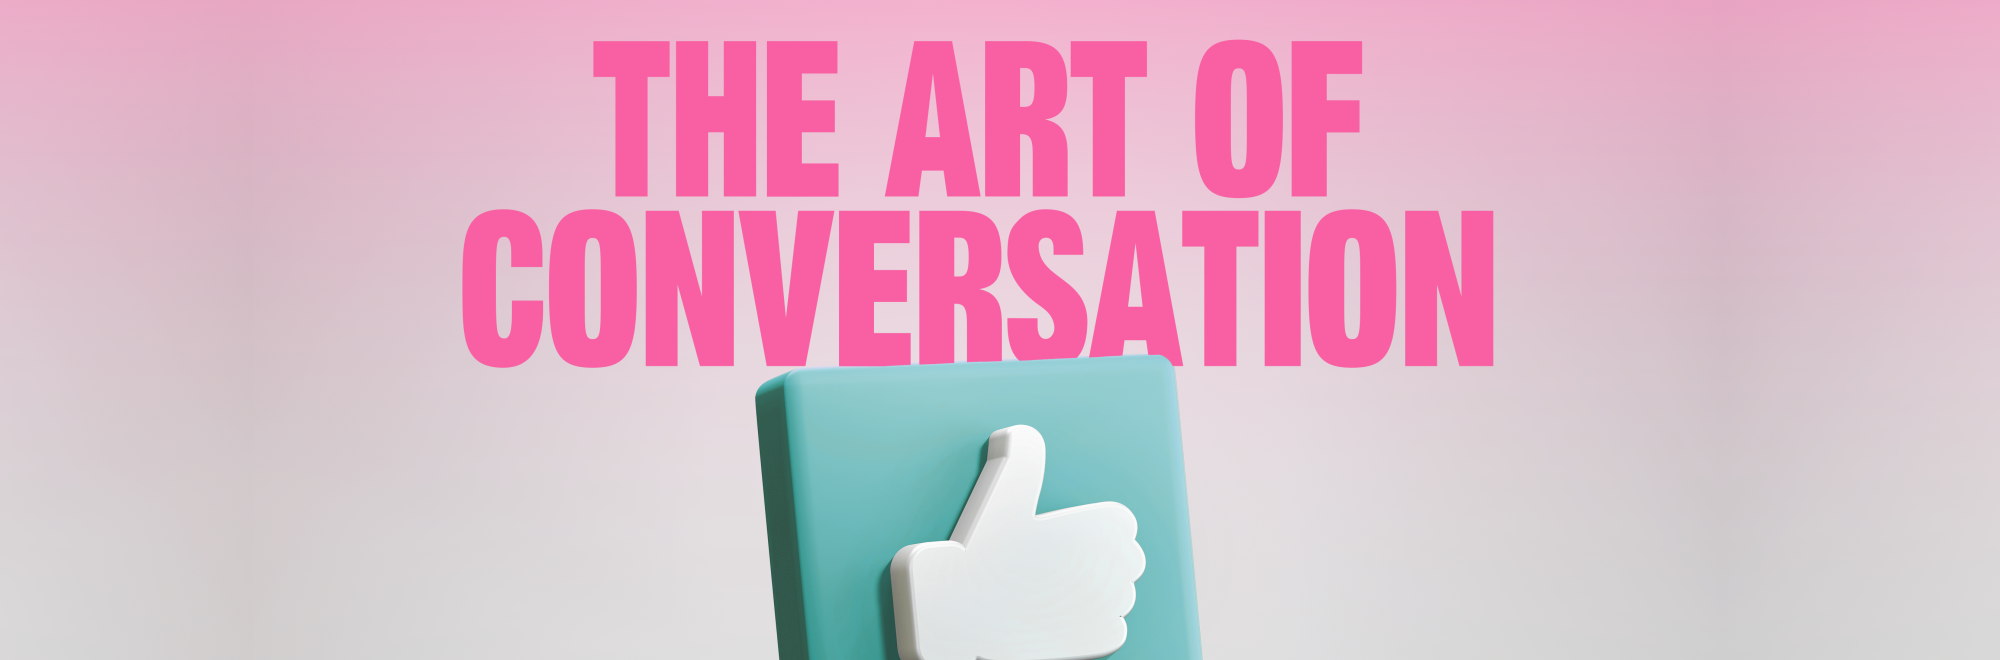 The Art of Conversation: How brands can embrace the conversations that matter most